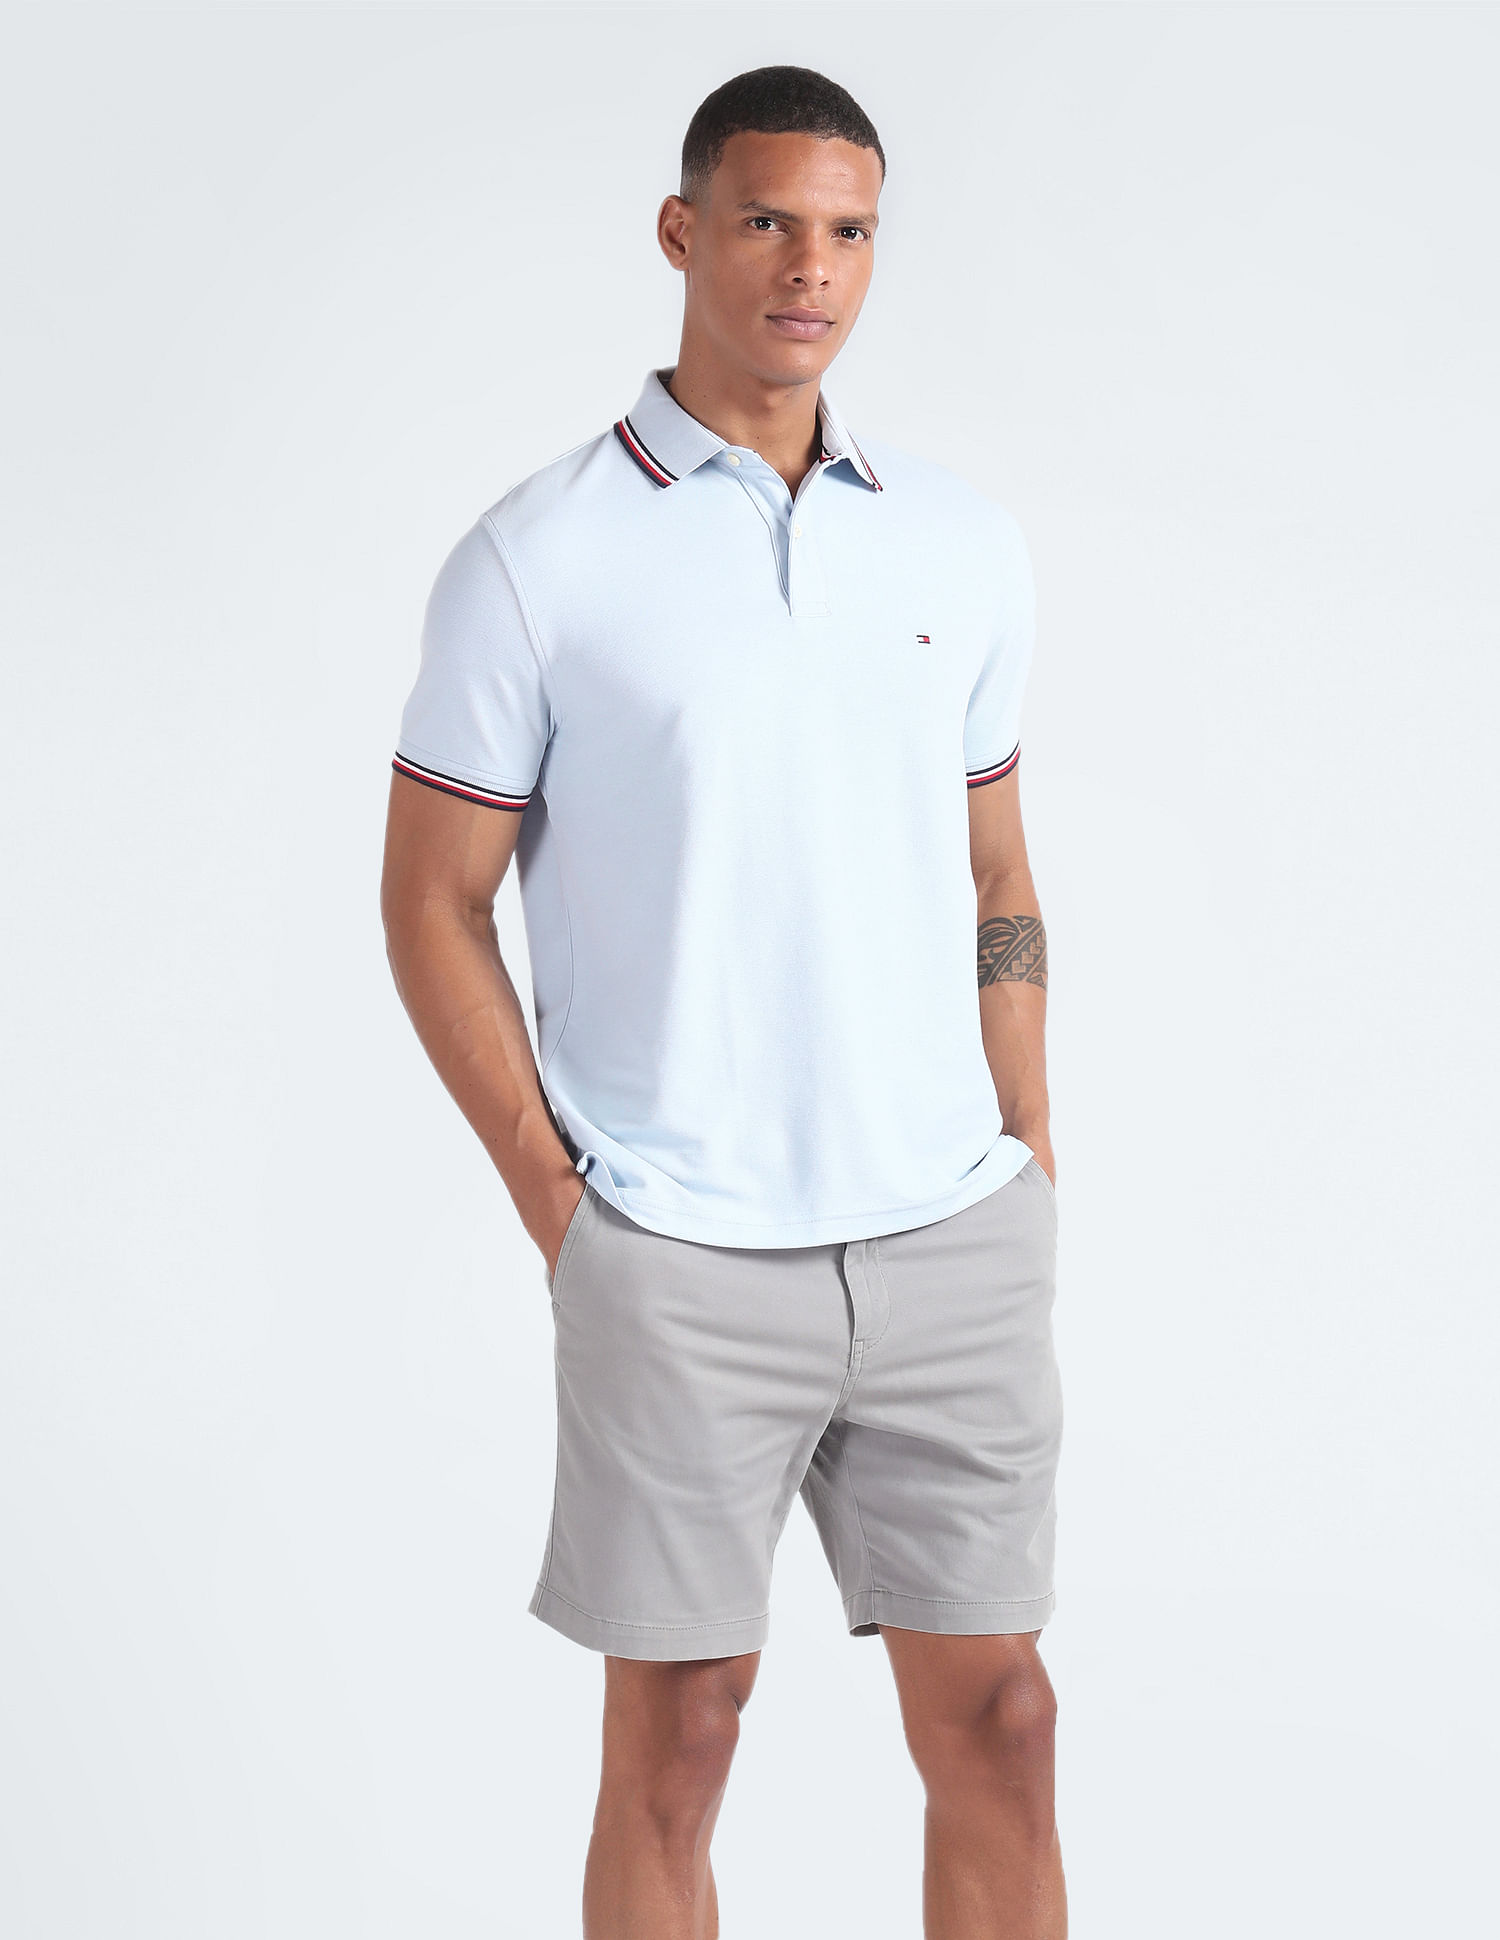 Tommy Hilfiger Tipped Organic Cotton Slim Fit Polo Shirt, White at